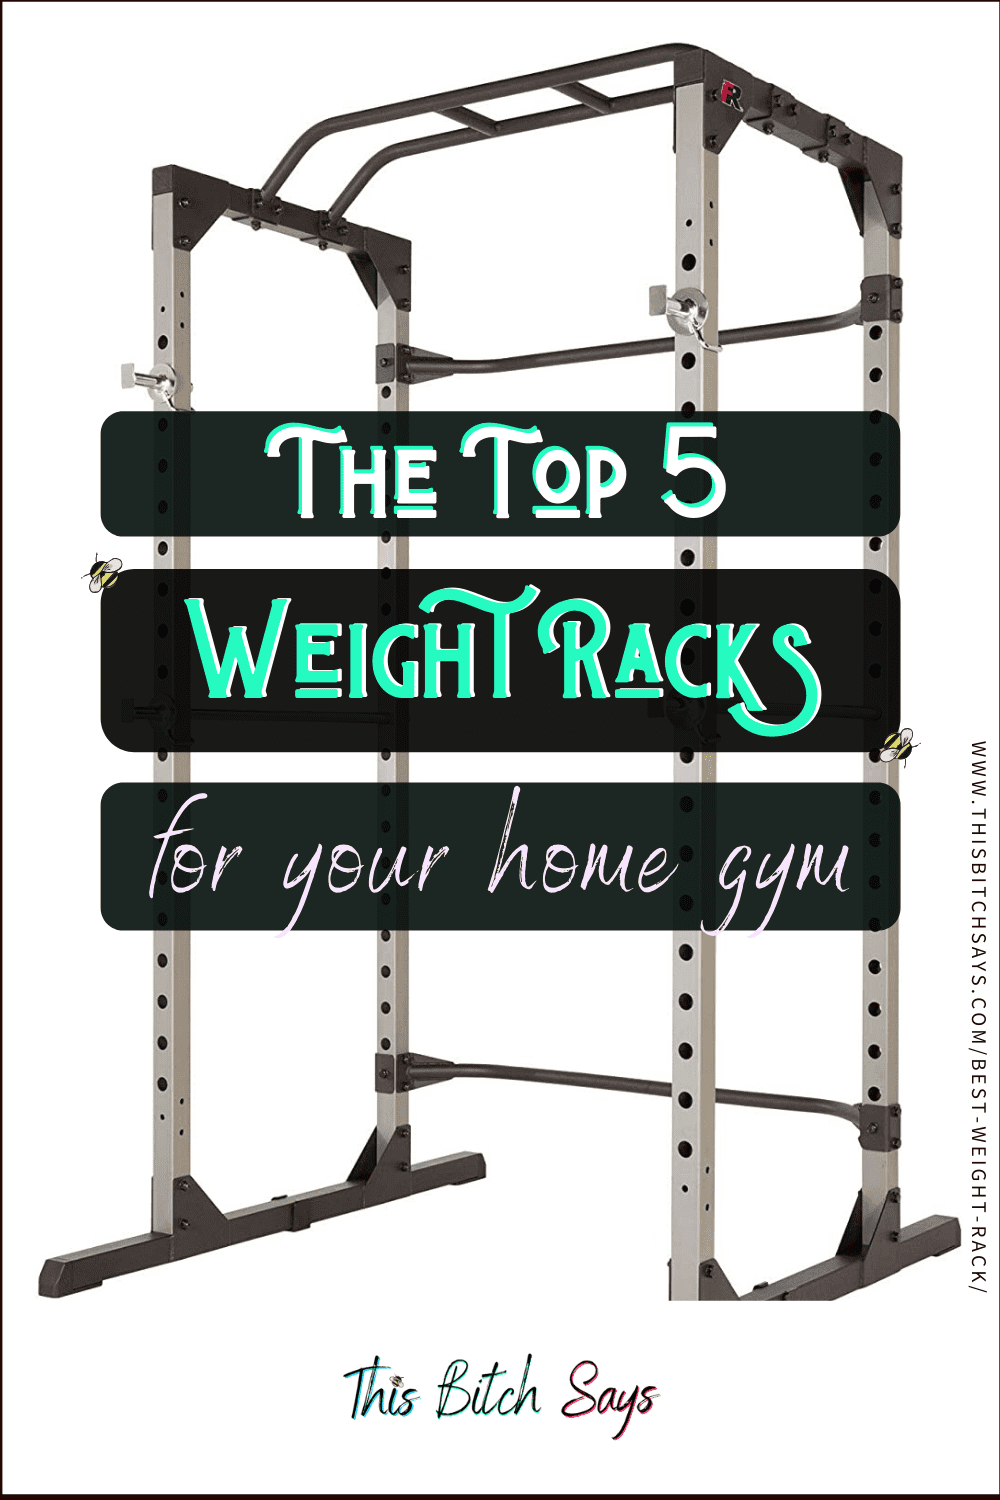 For Your Home: The Top 5 weight racks for your home gym.